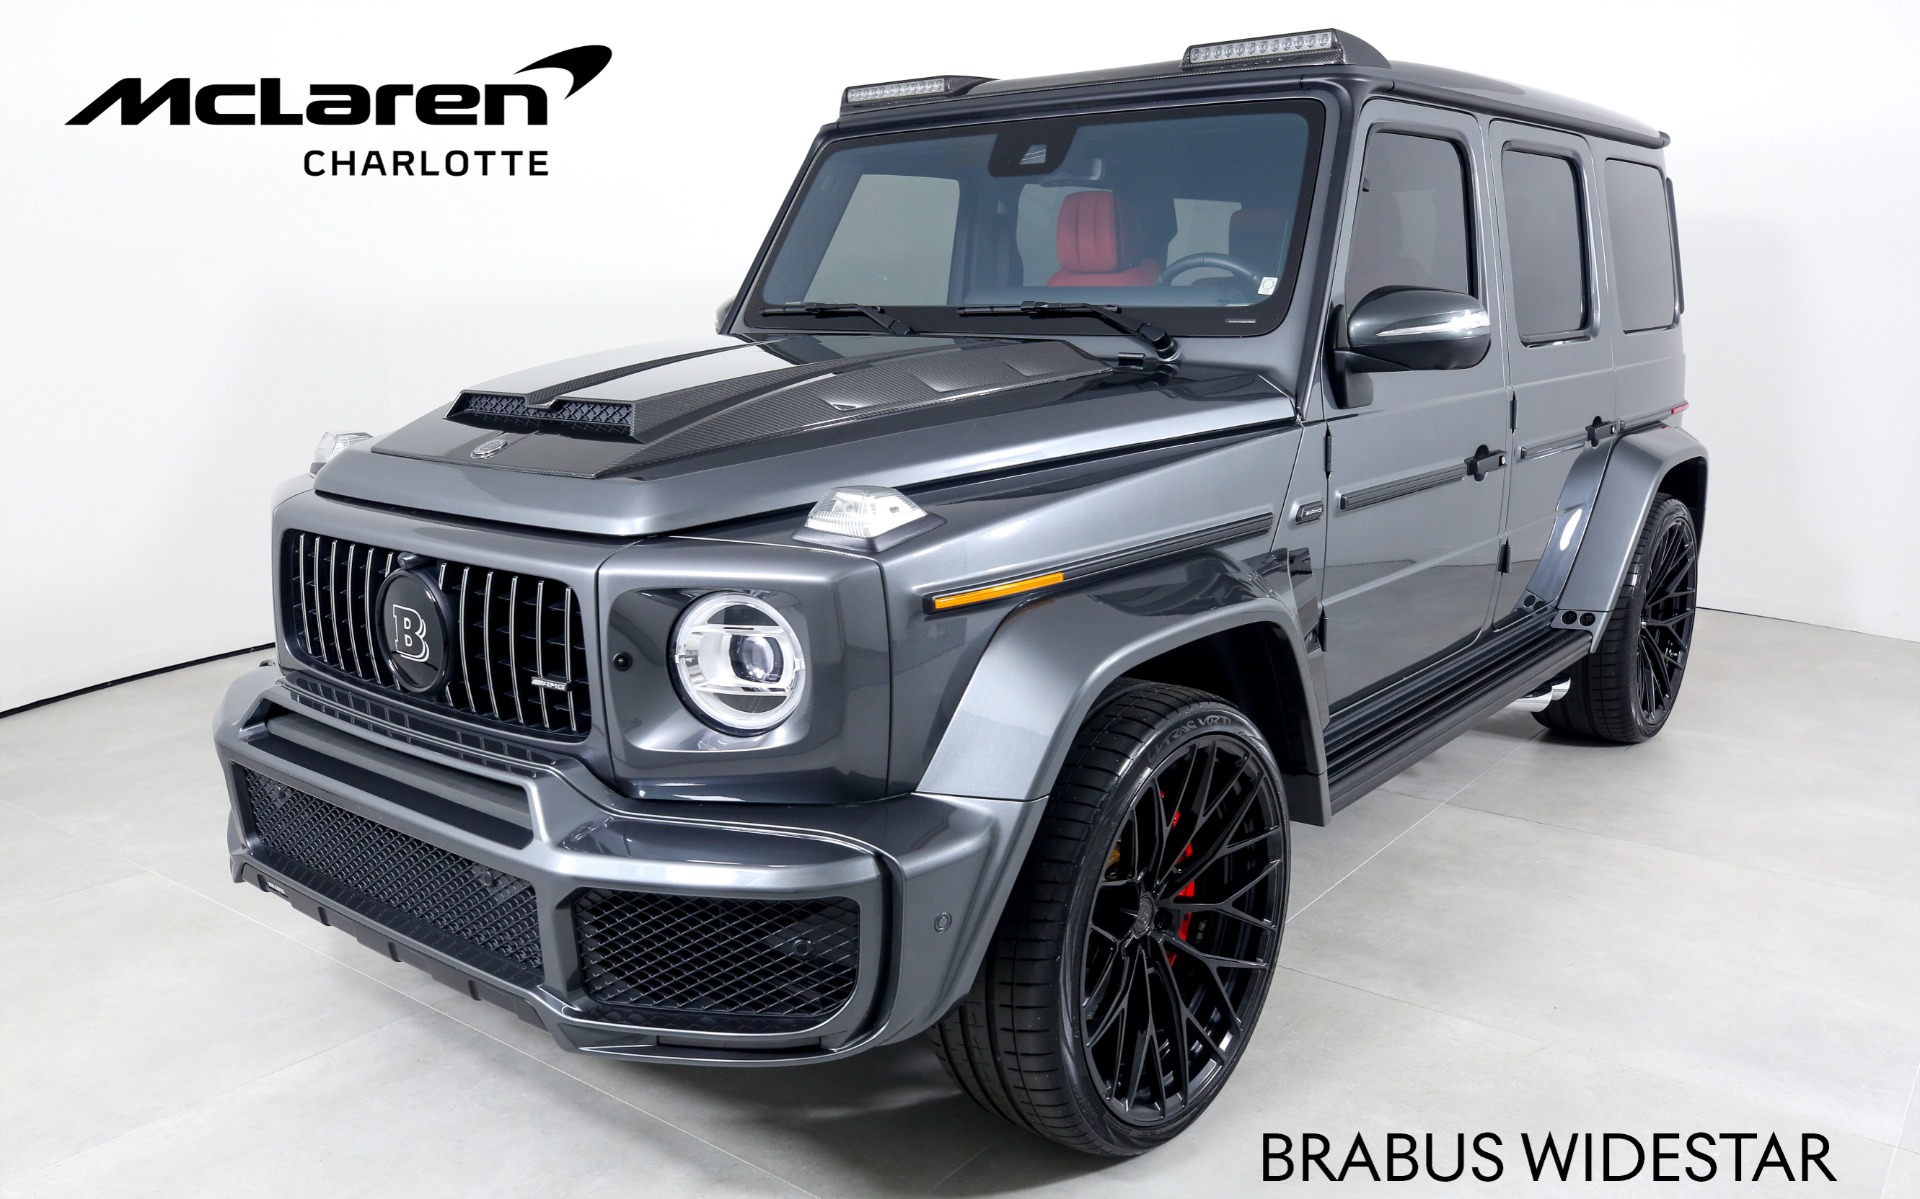 Used 21 Mercedes Benz G Class Amg G 63 For Sale 429 996 Mclaren Charlotte Stock 3956